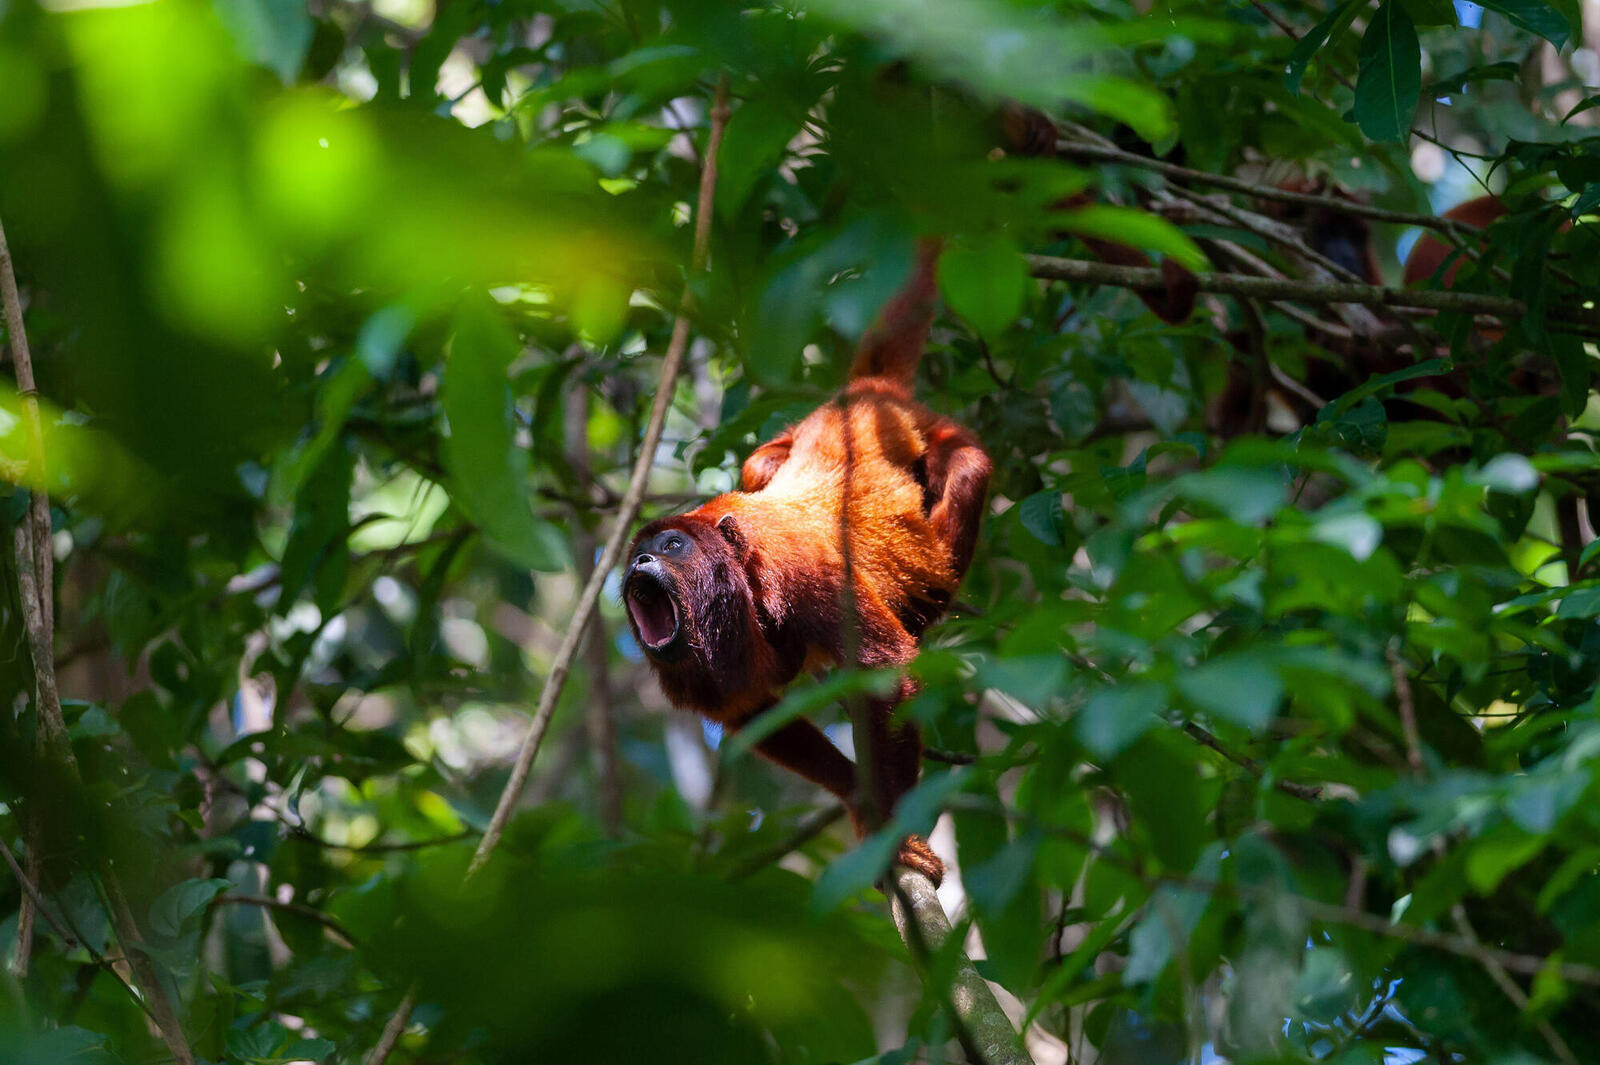 Red and brown monkey on branch in foliage with mouth wide open